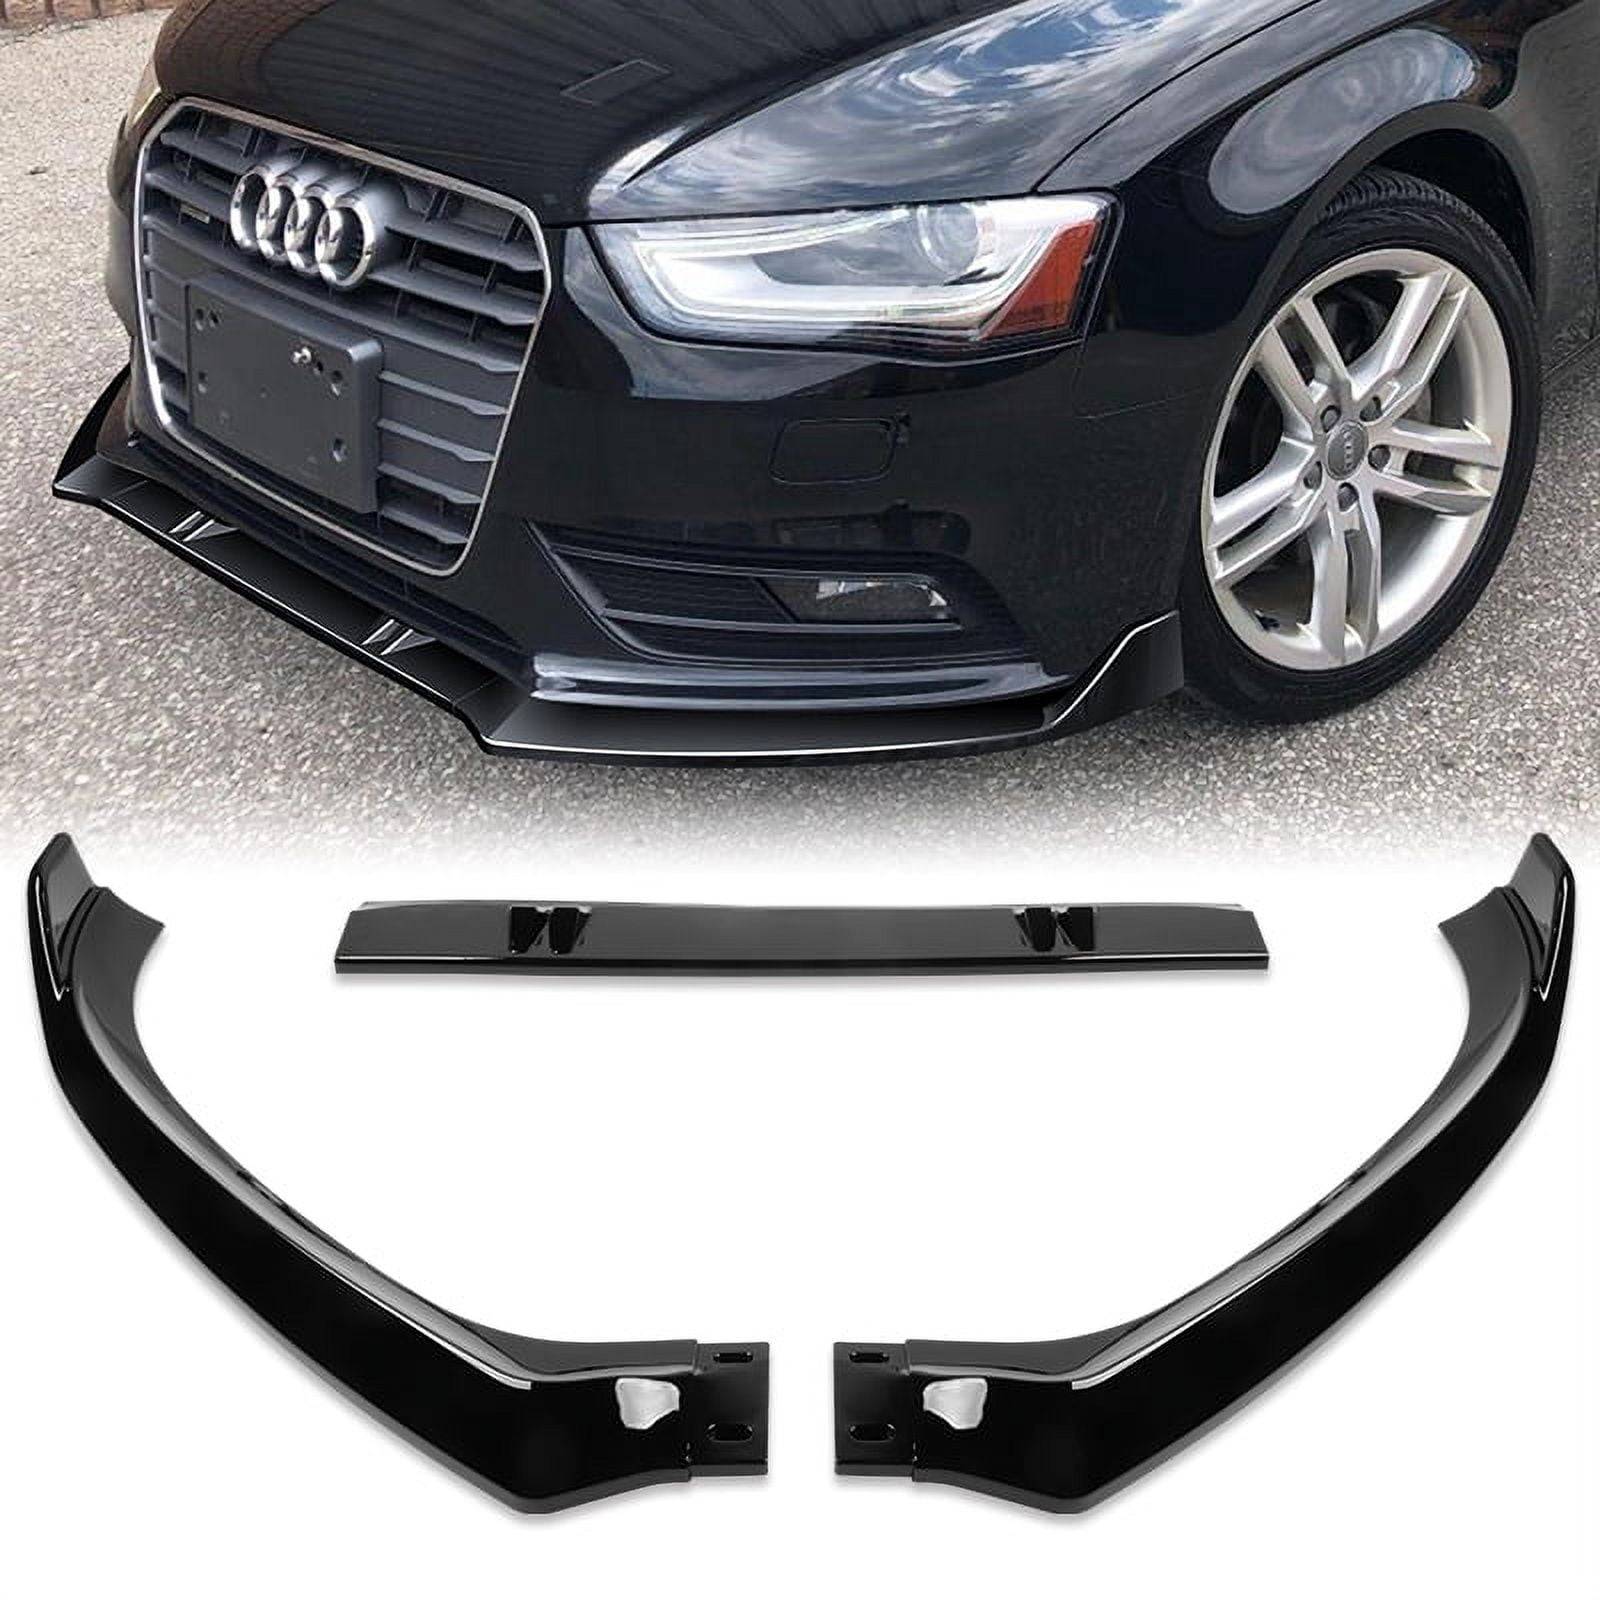 Spec-D Tuning Glossy Black Front Lip Spoiler Splitter Compatible with  Mercedes Benz C-Class W205 2019-2021 